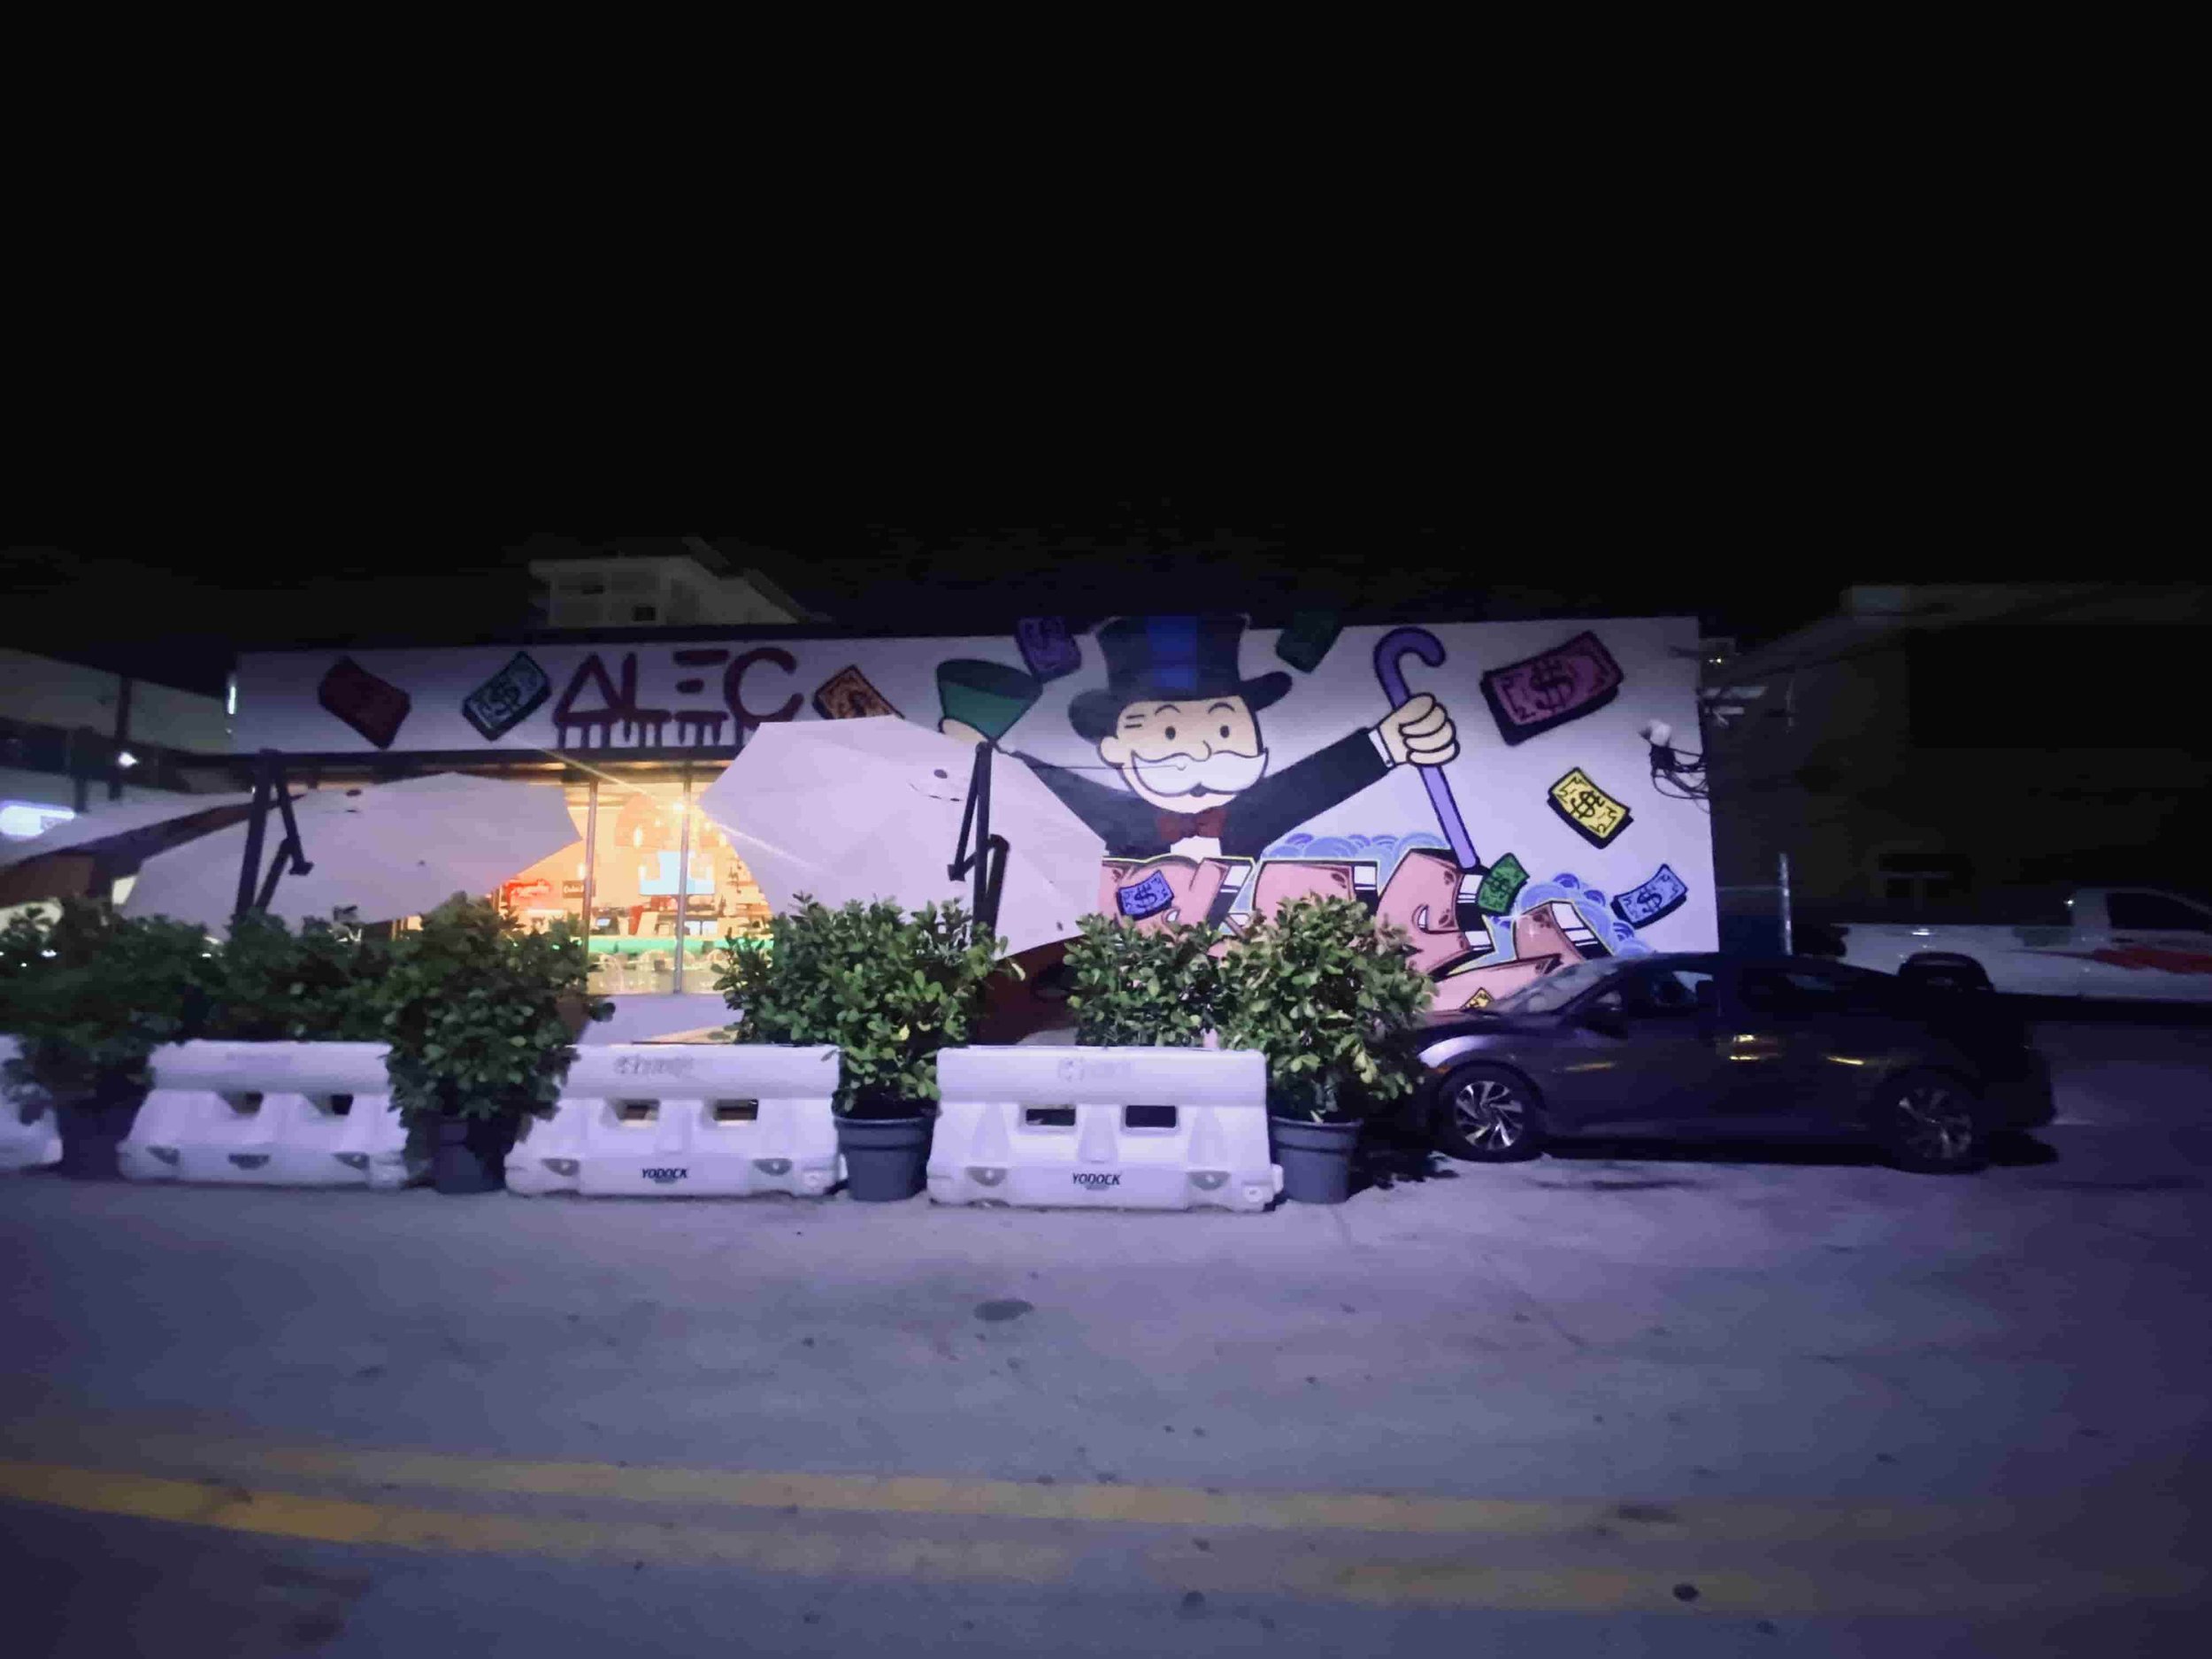 Alec Monopoly pays homage to Virgil Abloh with another mural in